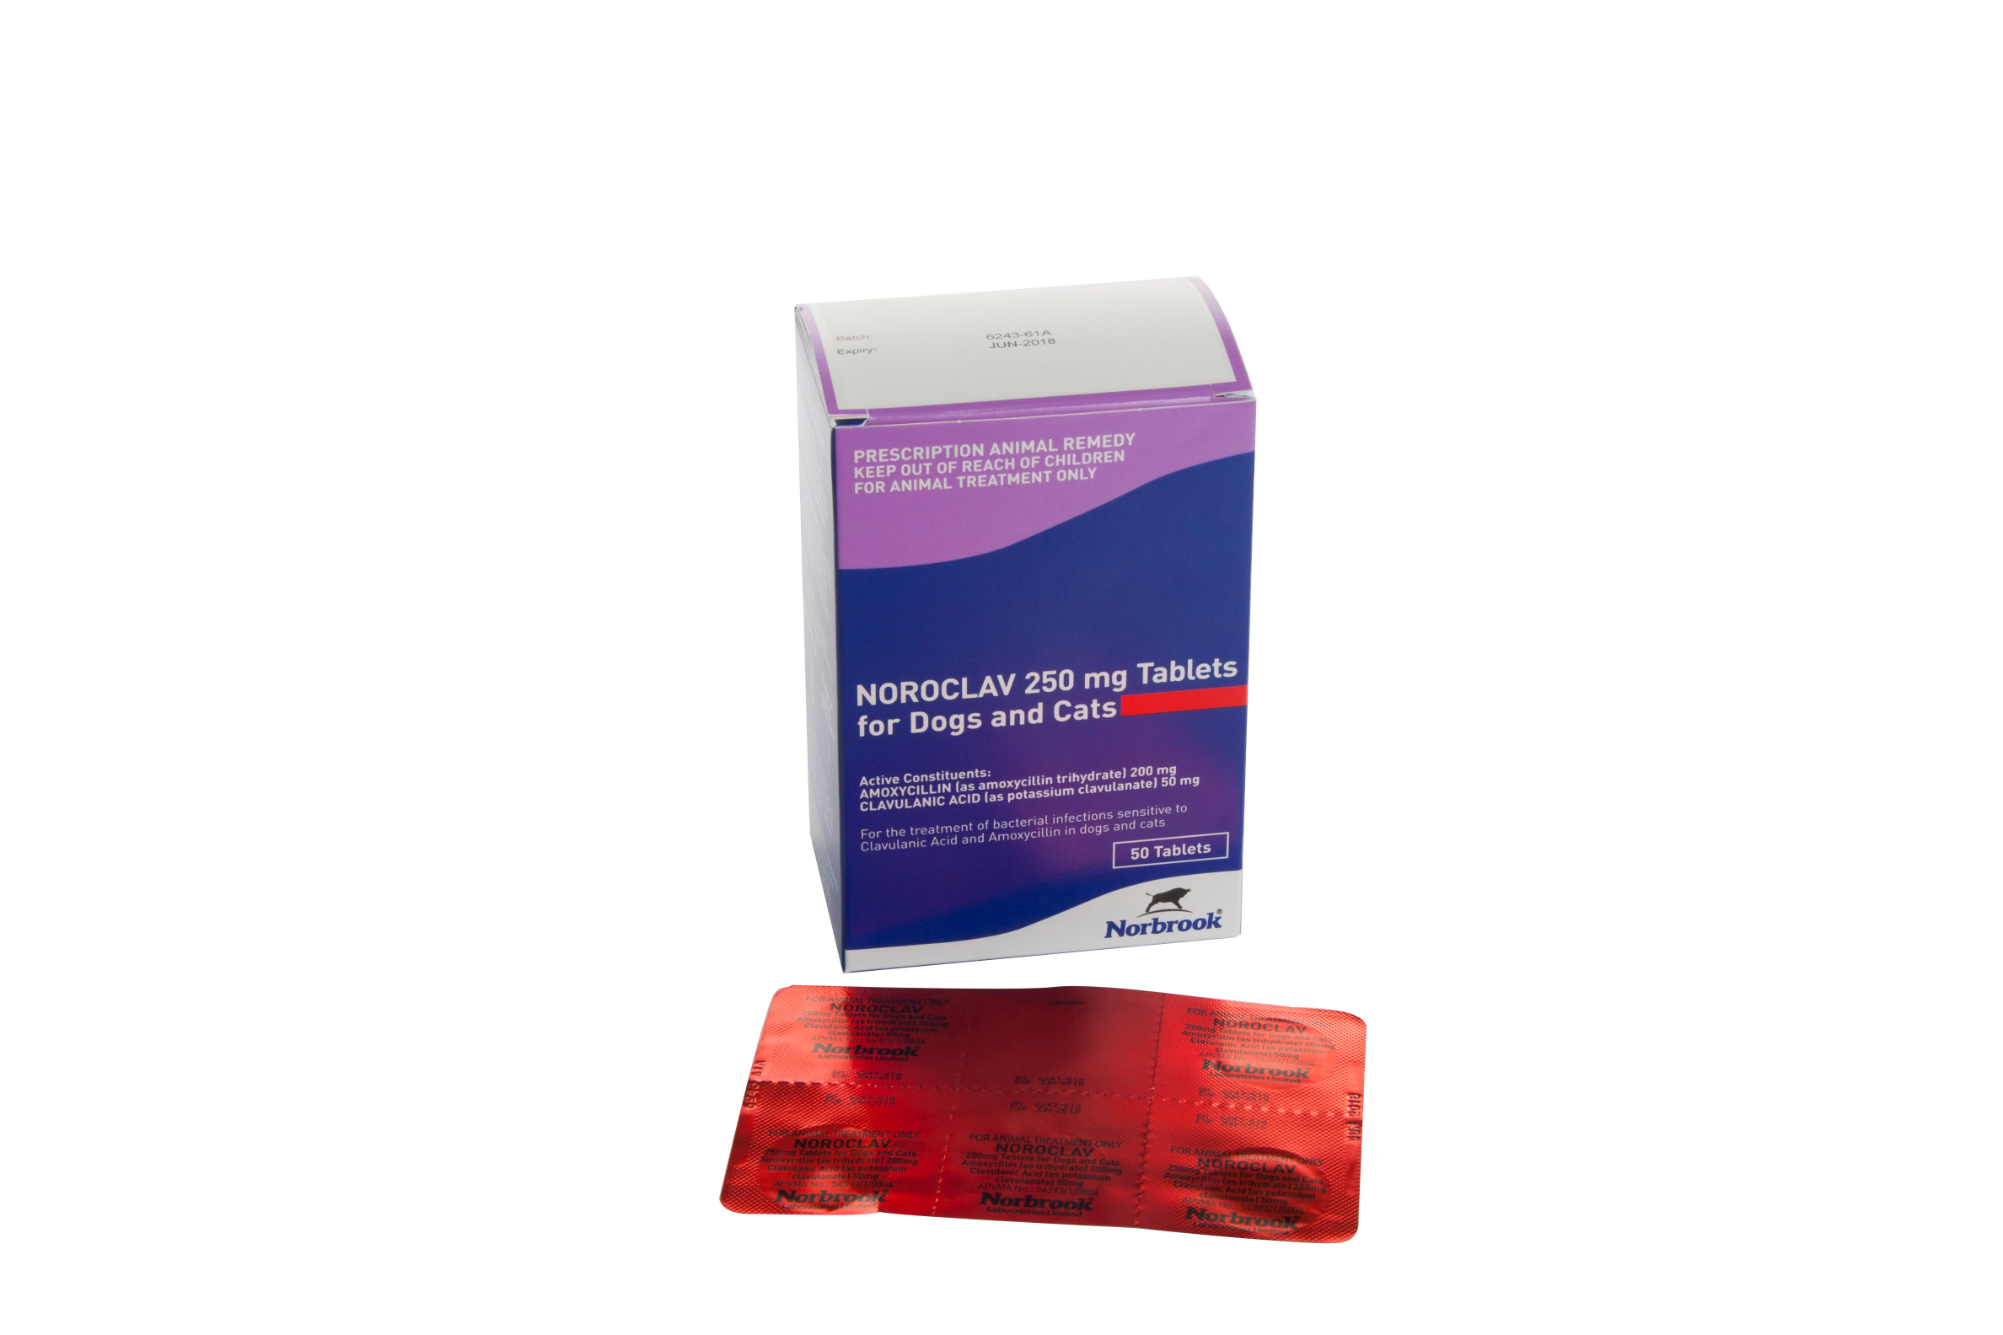 Noroclav Tablets 50mg and 250mg for Dogs and Cats